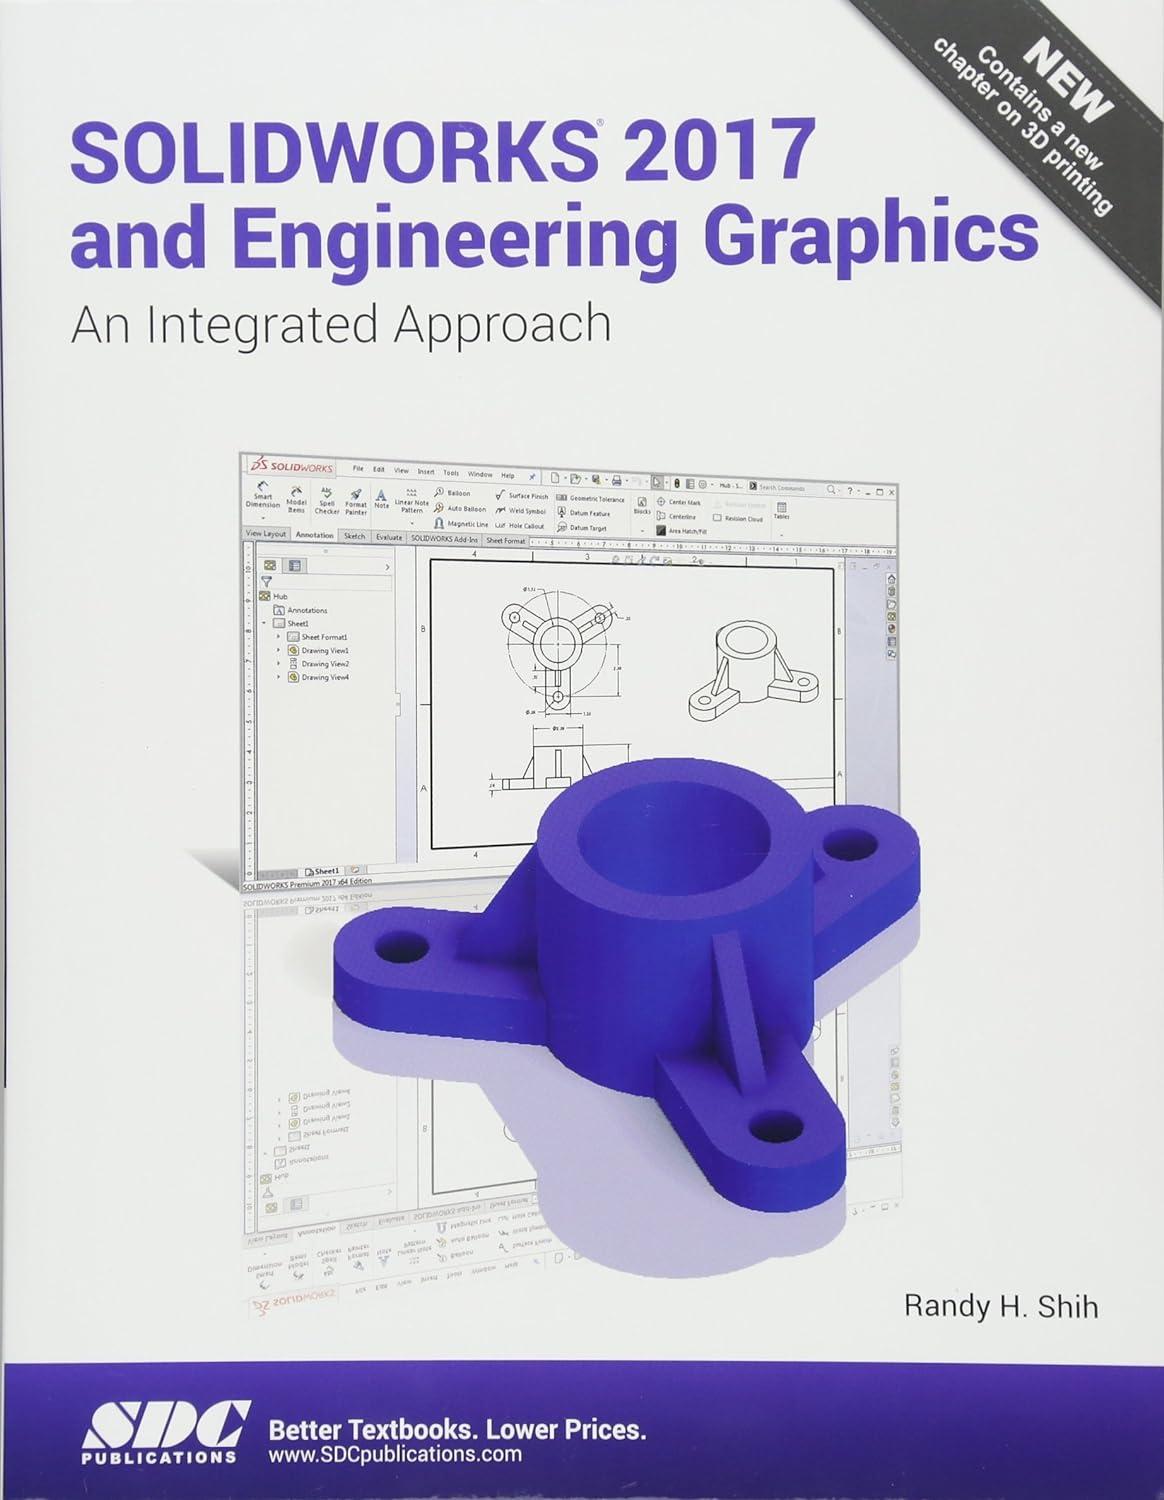 solidworks 2017 and engineering graphics 1st edition randy shih 1630570737, 978-1630570736